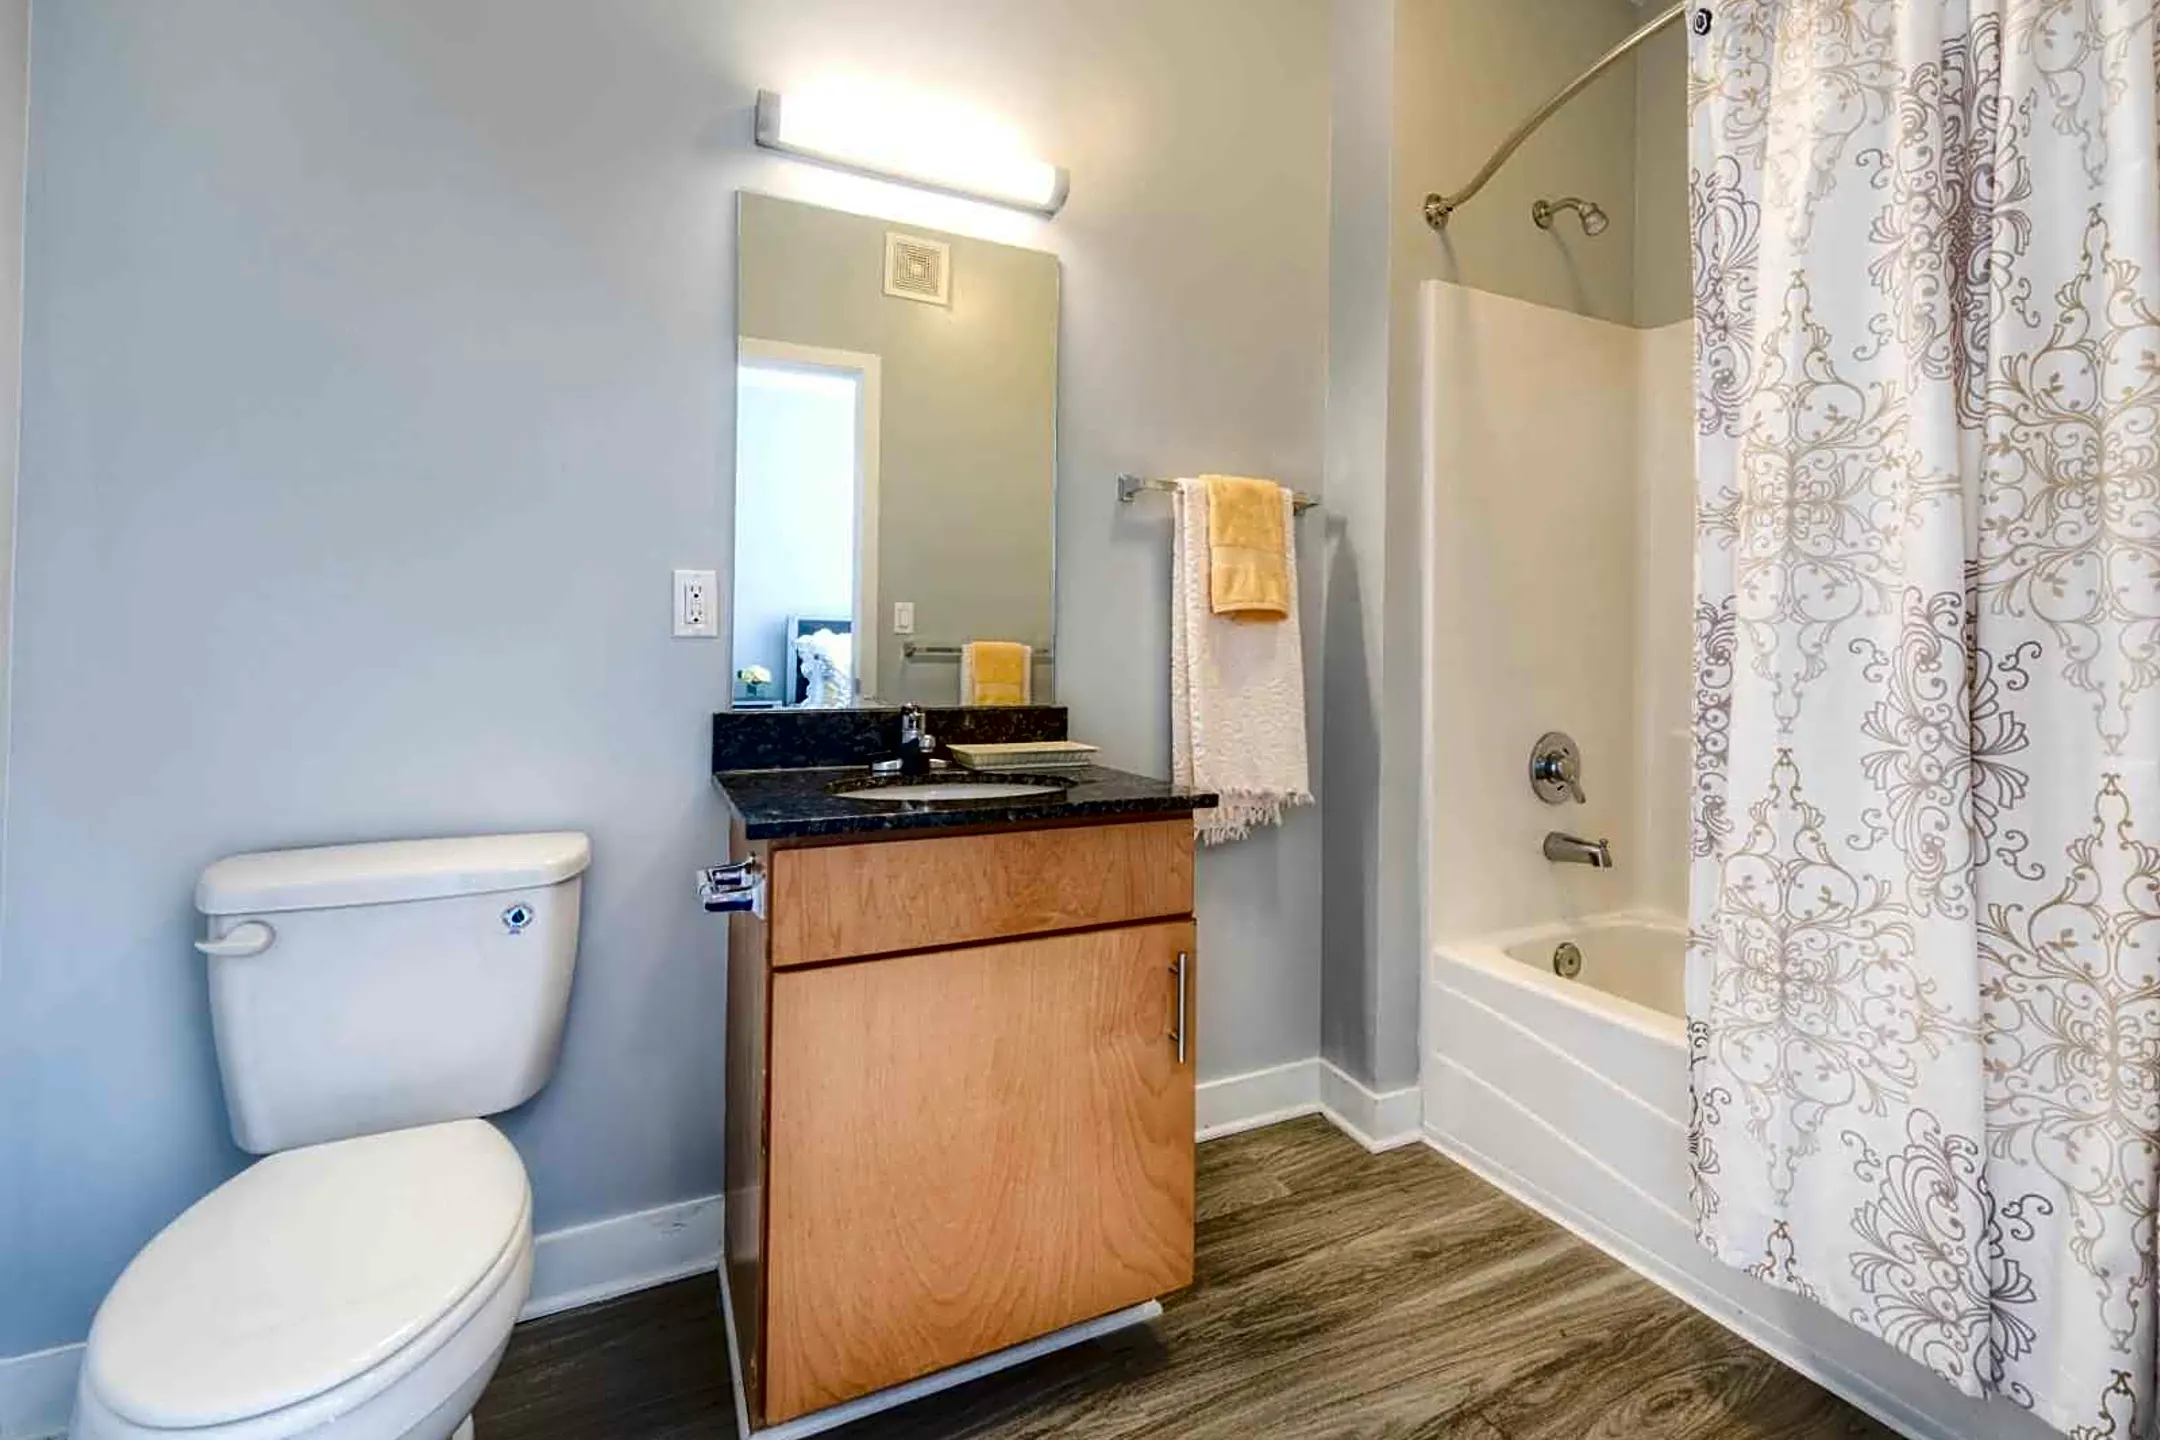 Bathroom - The Clubhouse Apartments - Louisville, KY